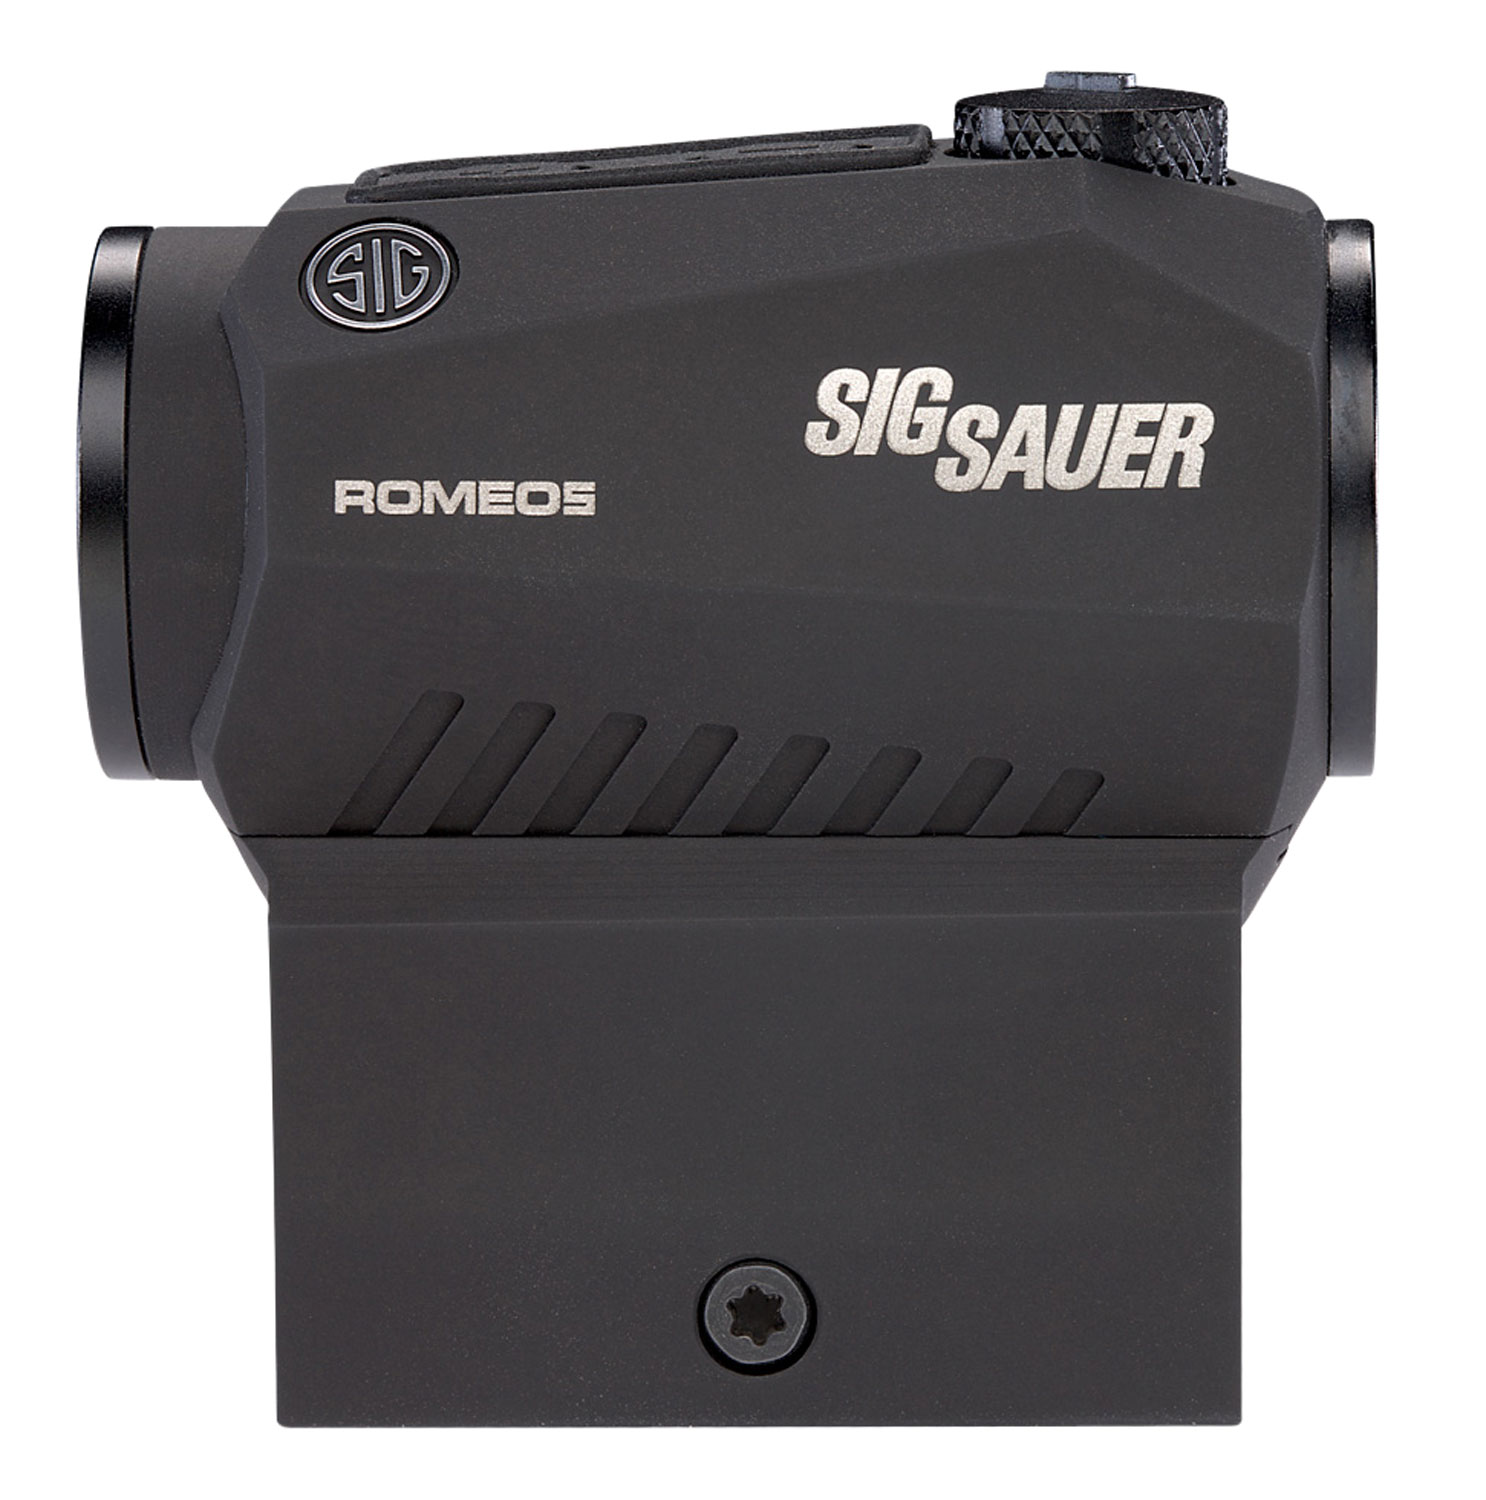 Sig Sauer Electro-Optics SOR52001 Romeo5 1 x 20mm Closed Red Dot Sights Black Anodized 1x20mm 2 MOA Red Dot Reticle